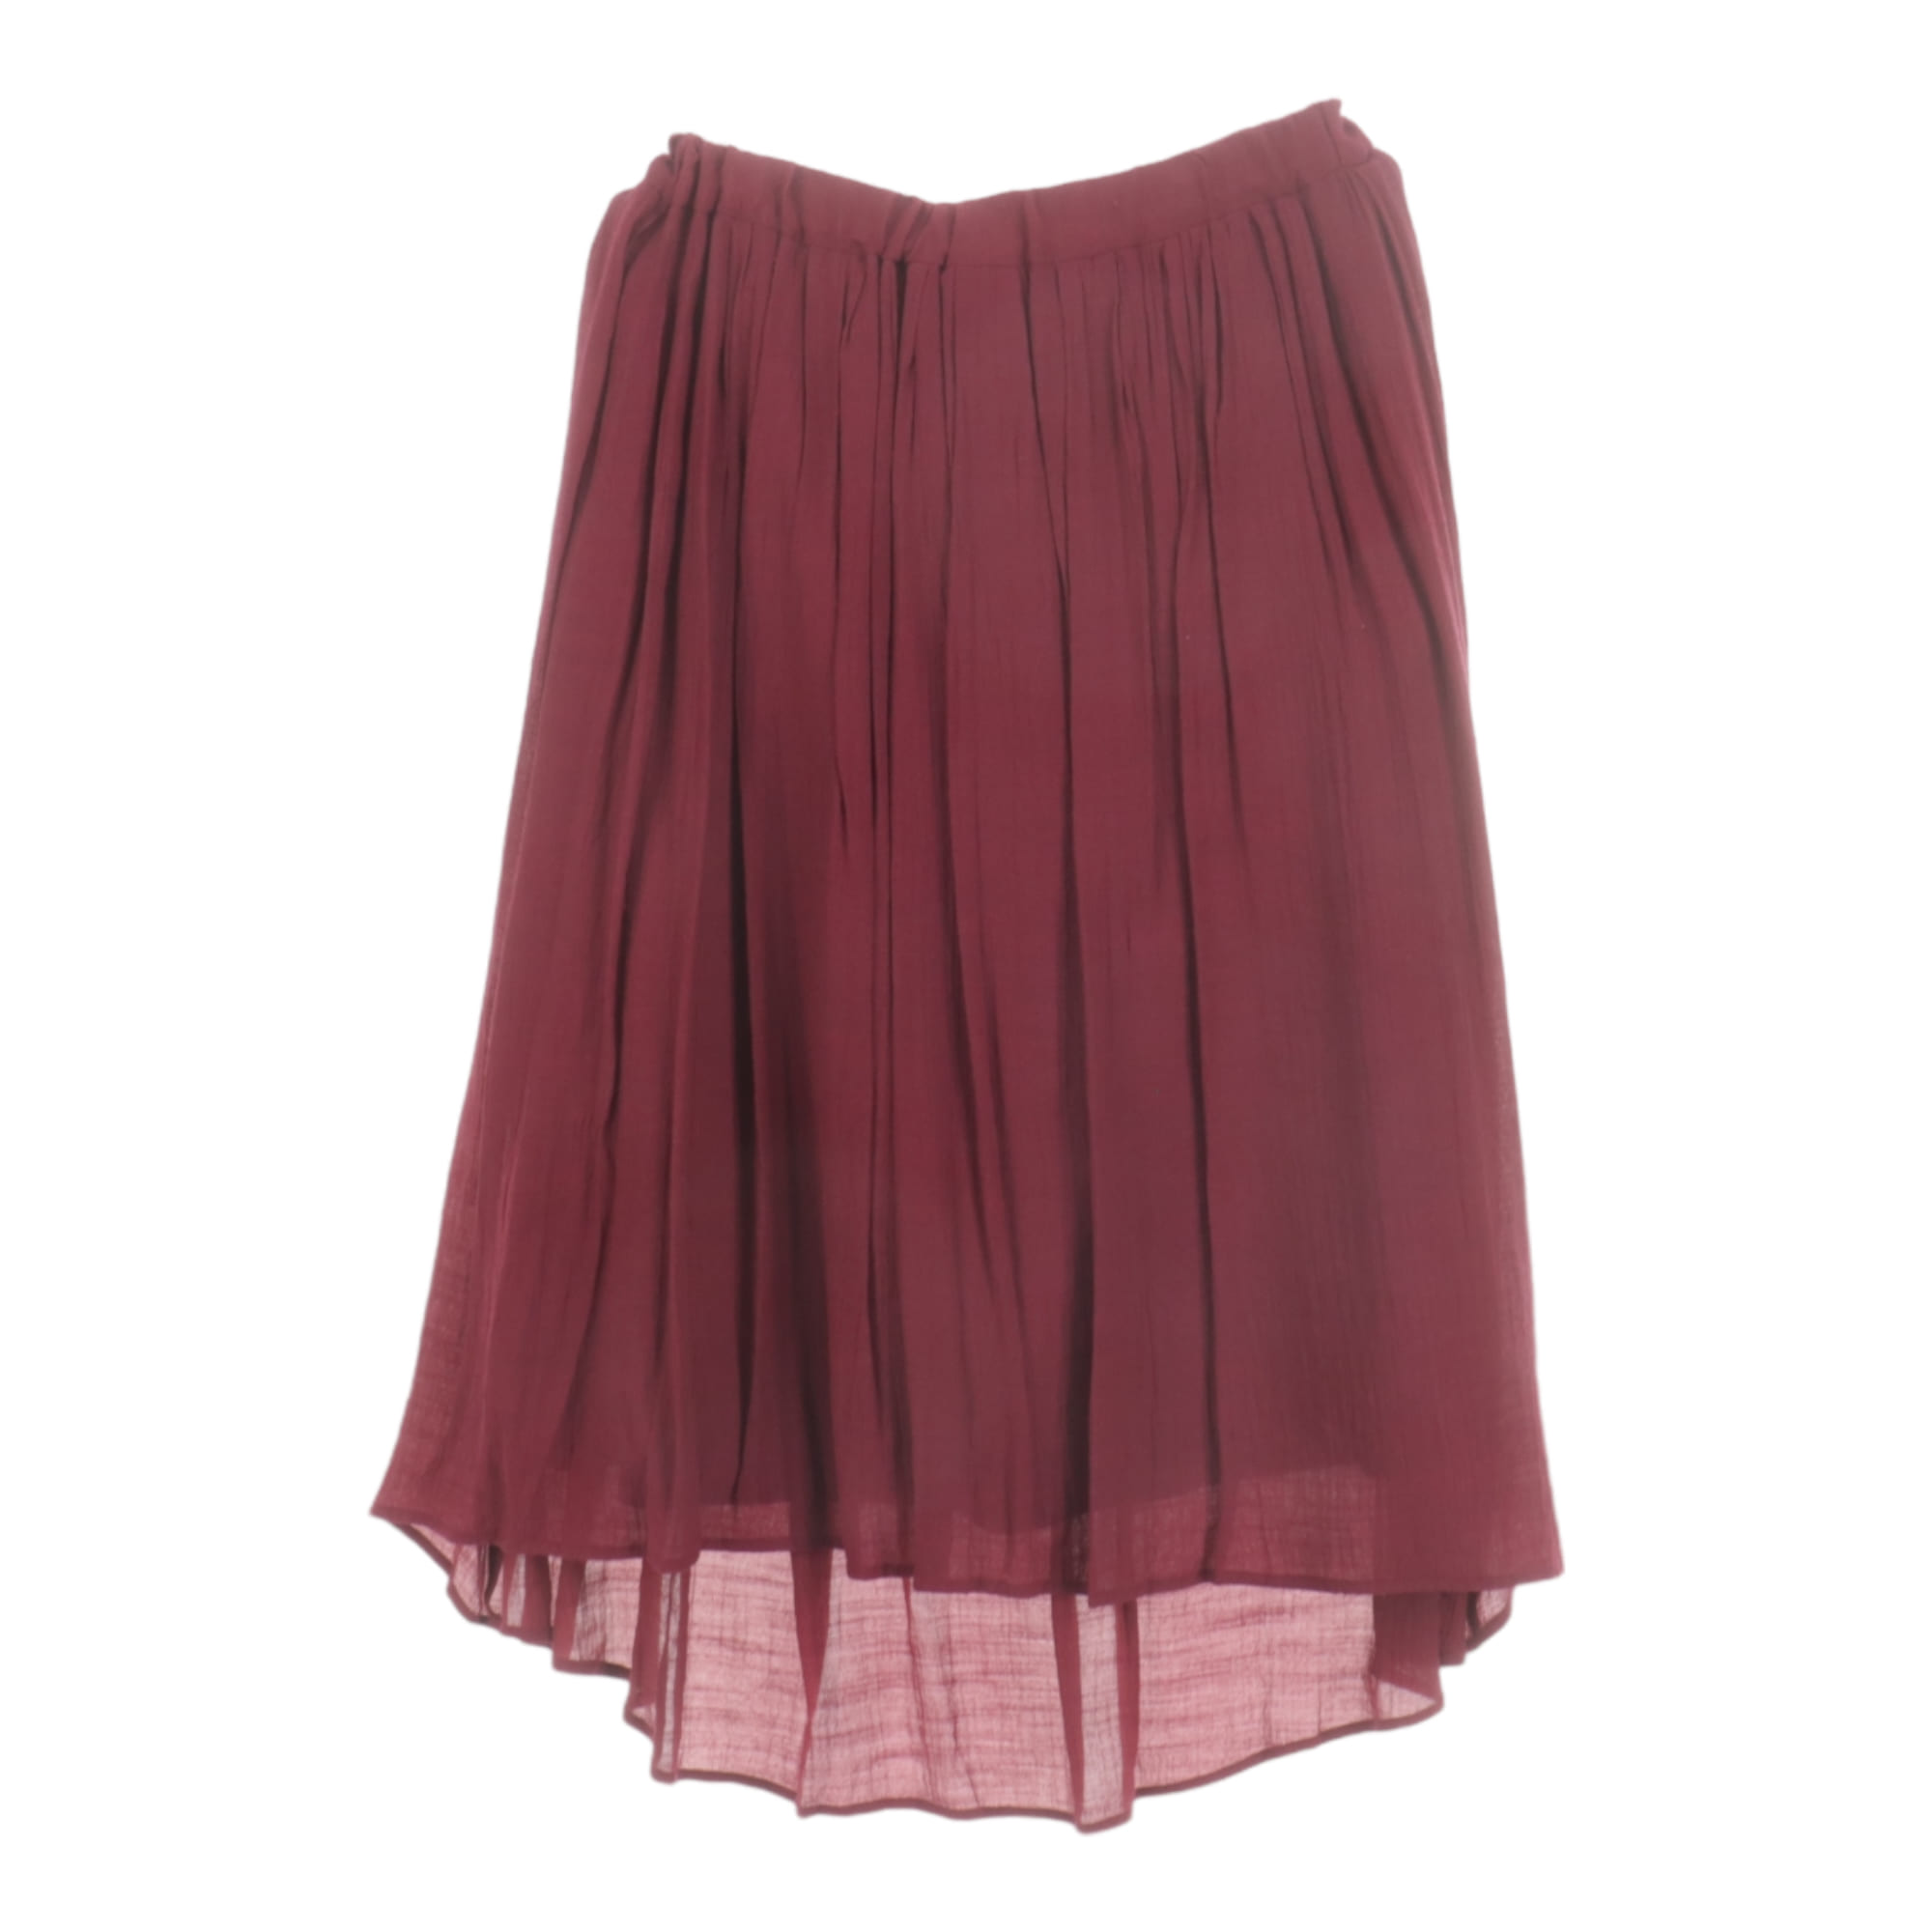 Selectione,Skirt